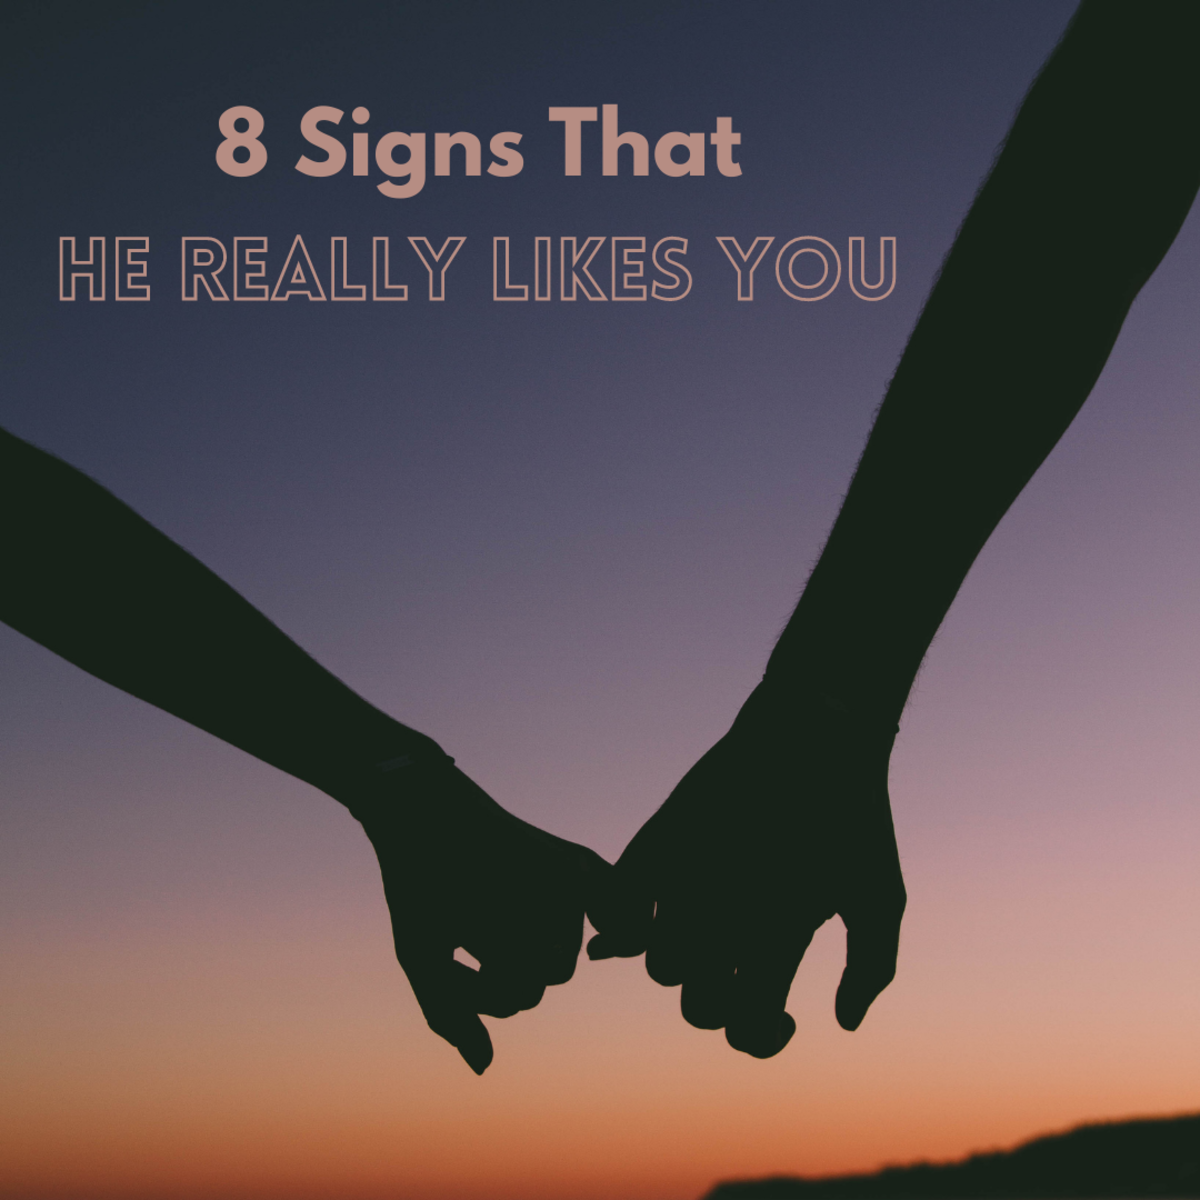 Does he really like you? Here are eight signs that he's really interested!